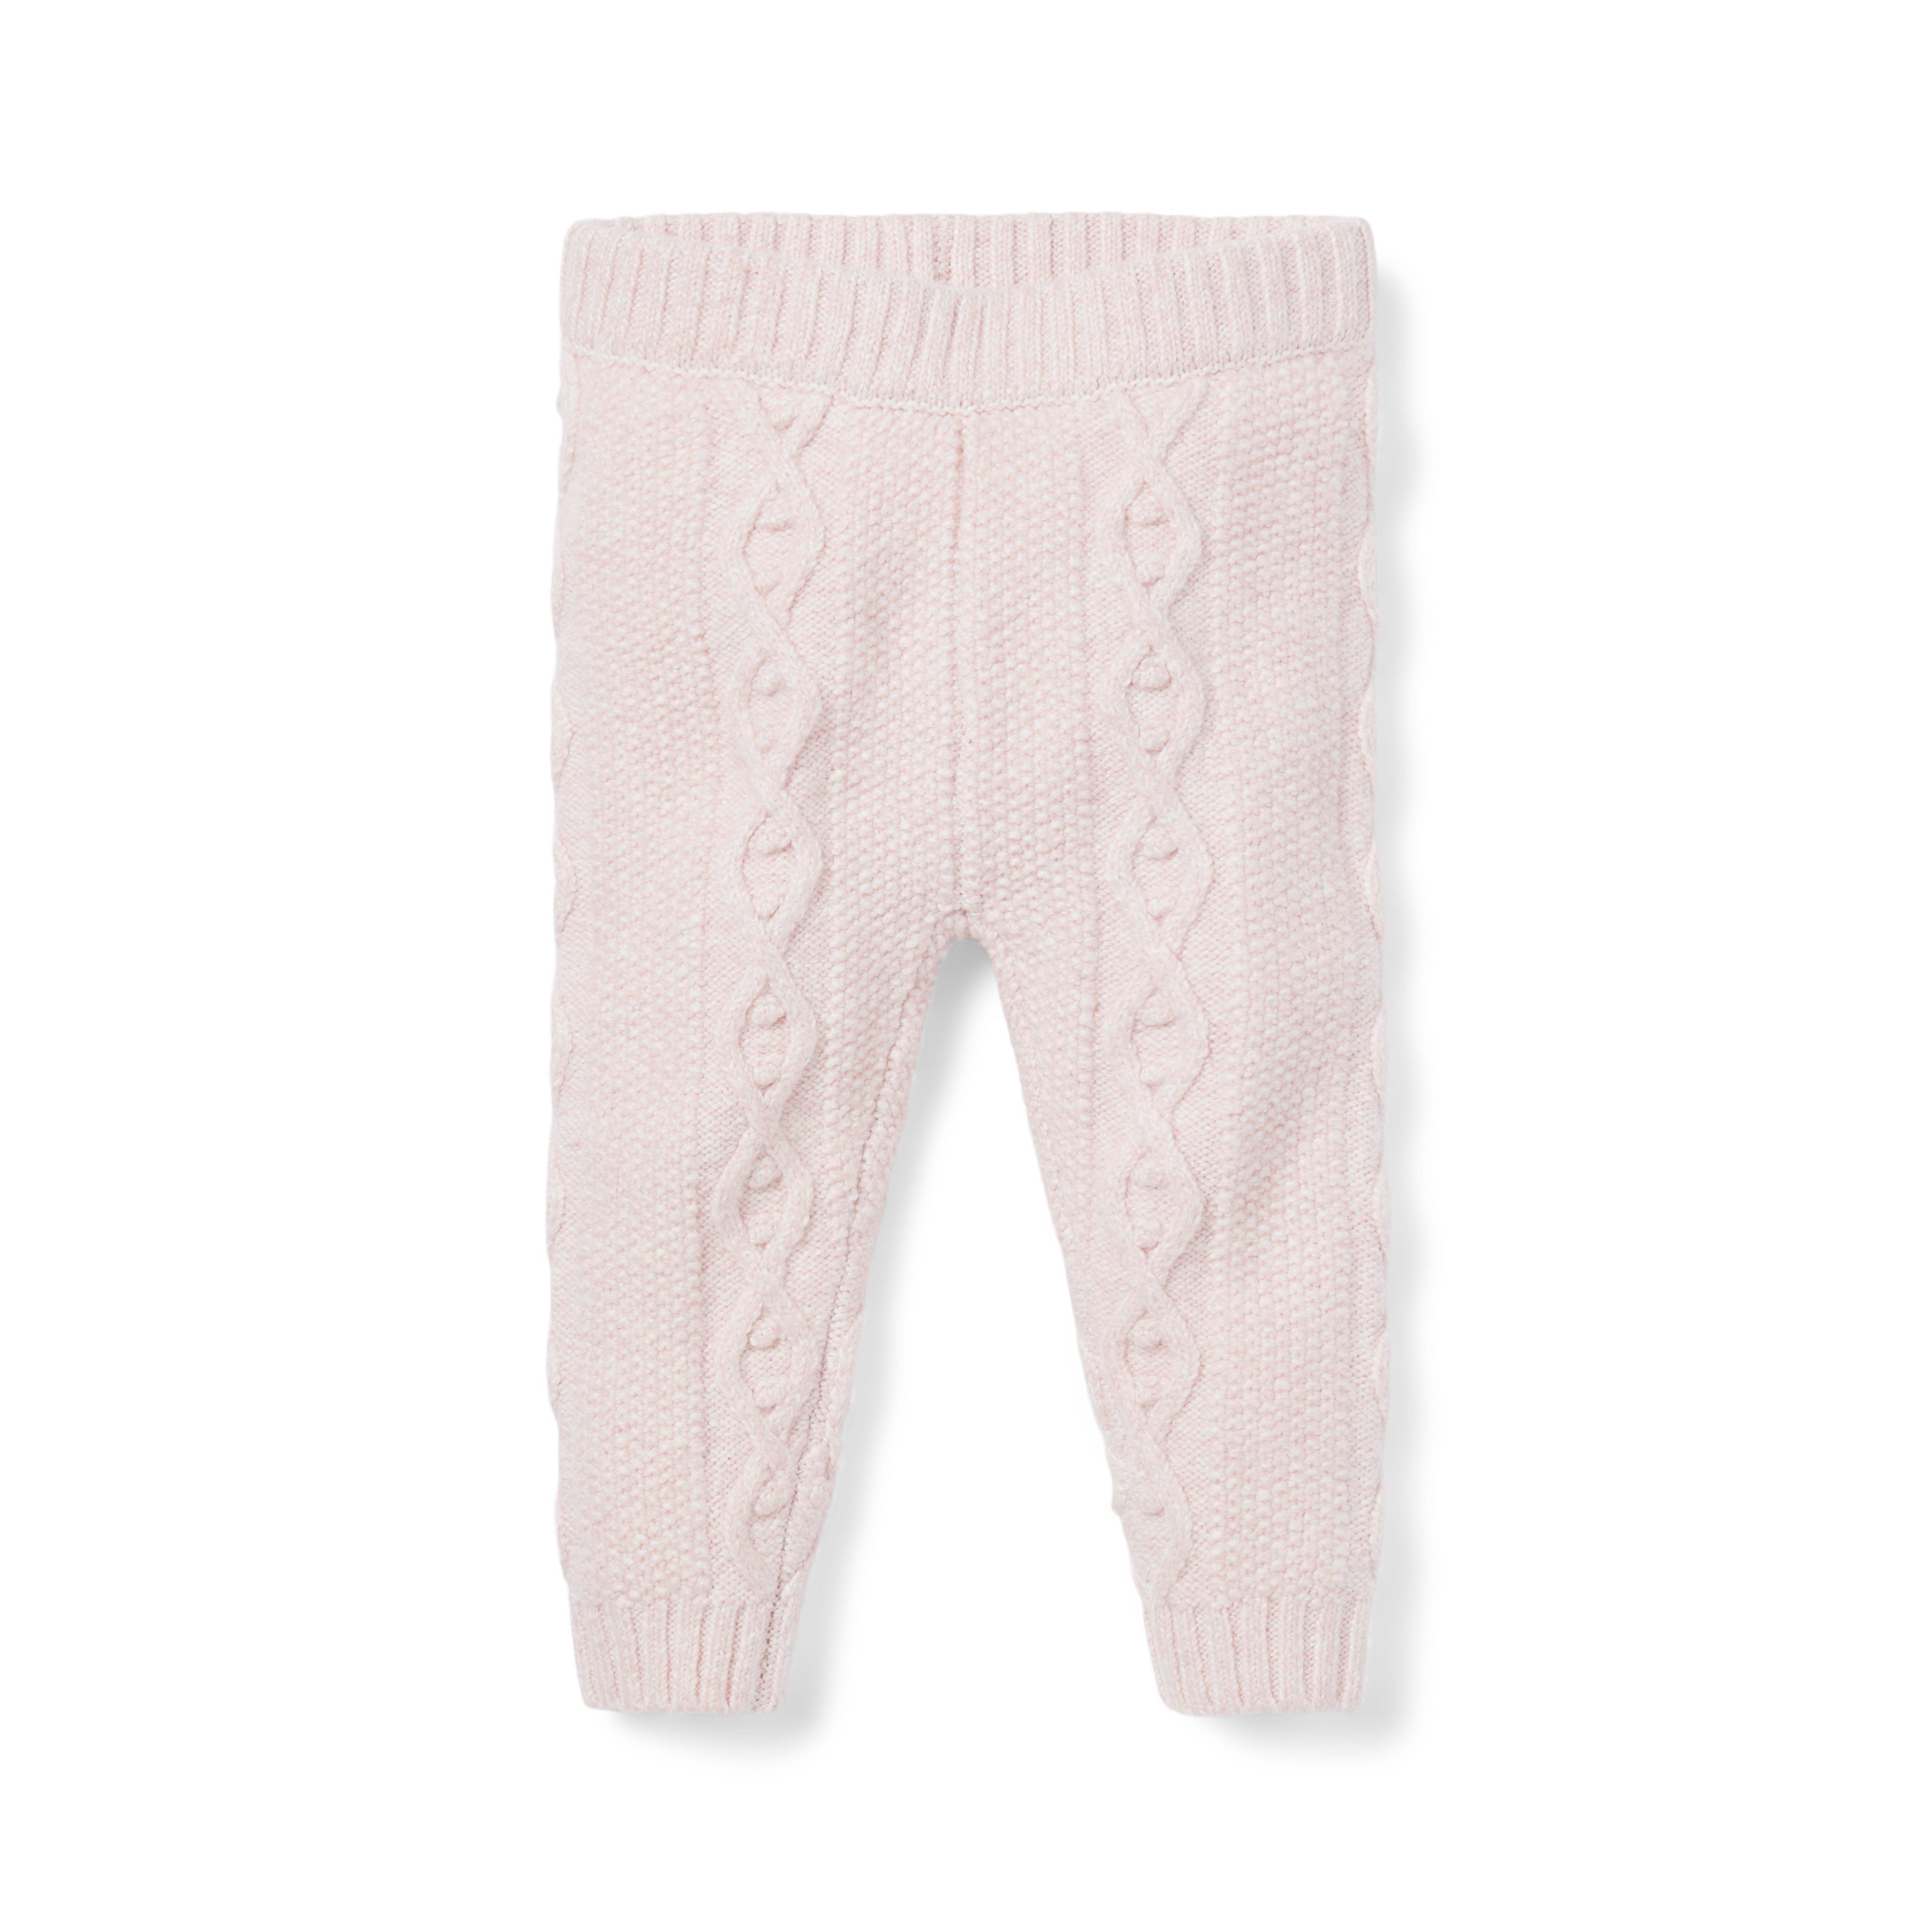 The Cozy Cable Knit Baby Pant 